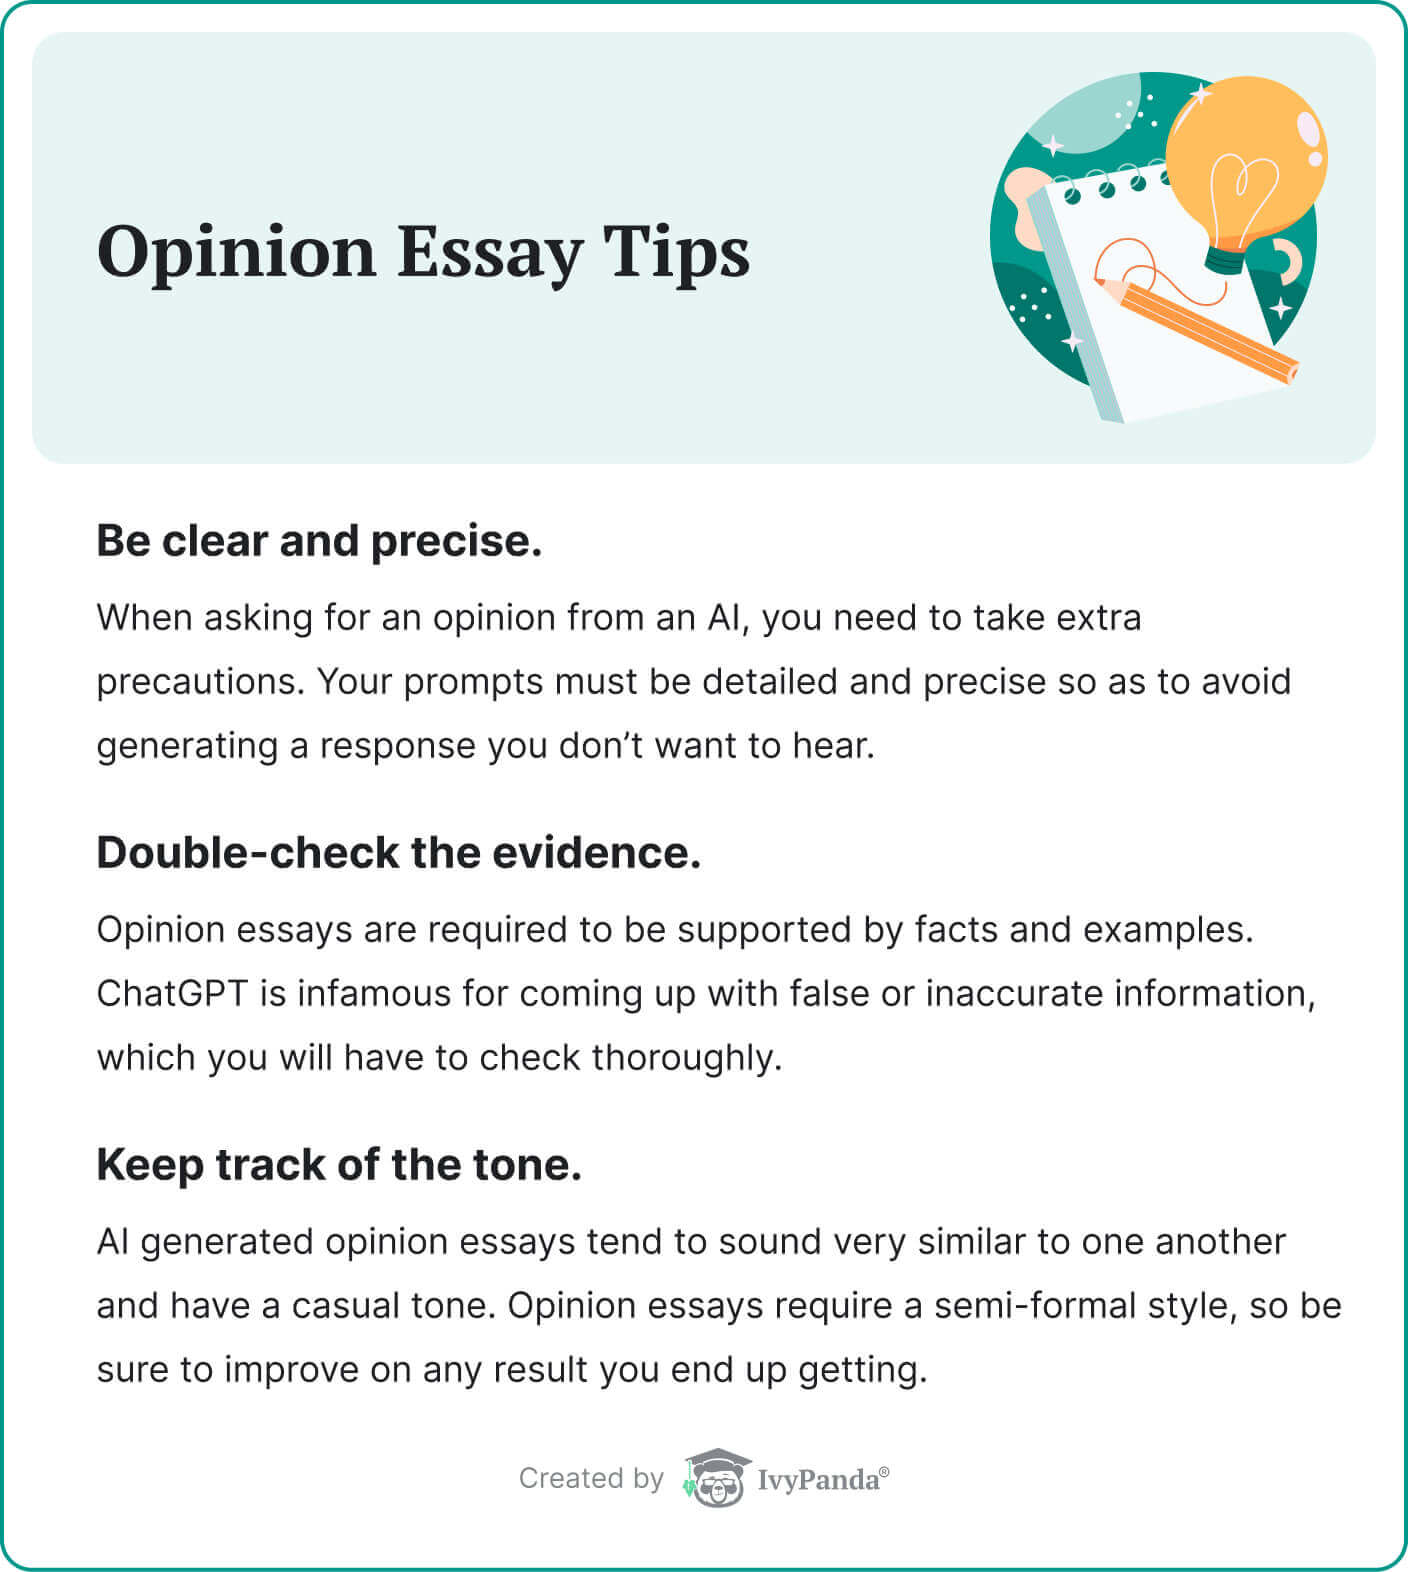 Tips for generating opinion essays in ChatGPT.